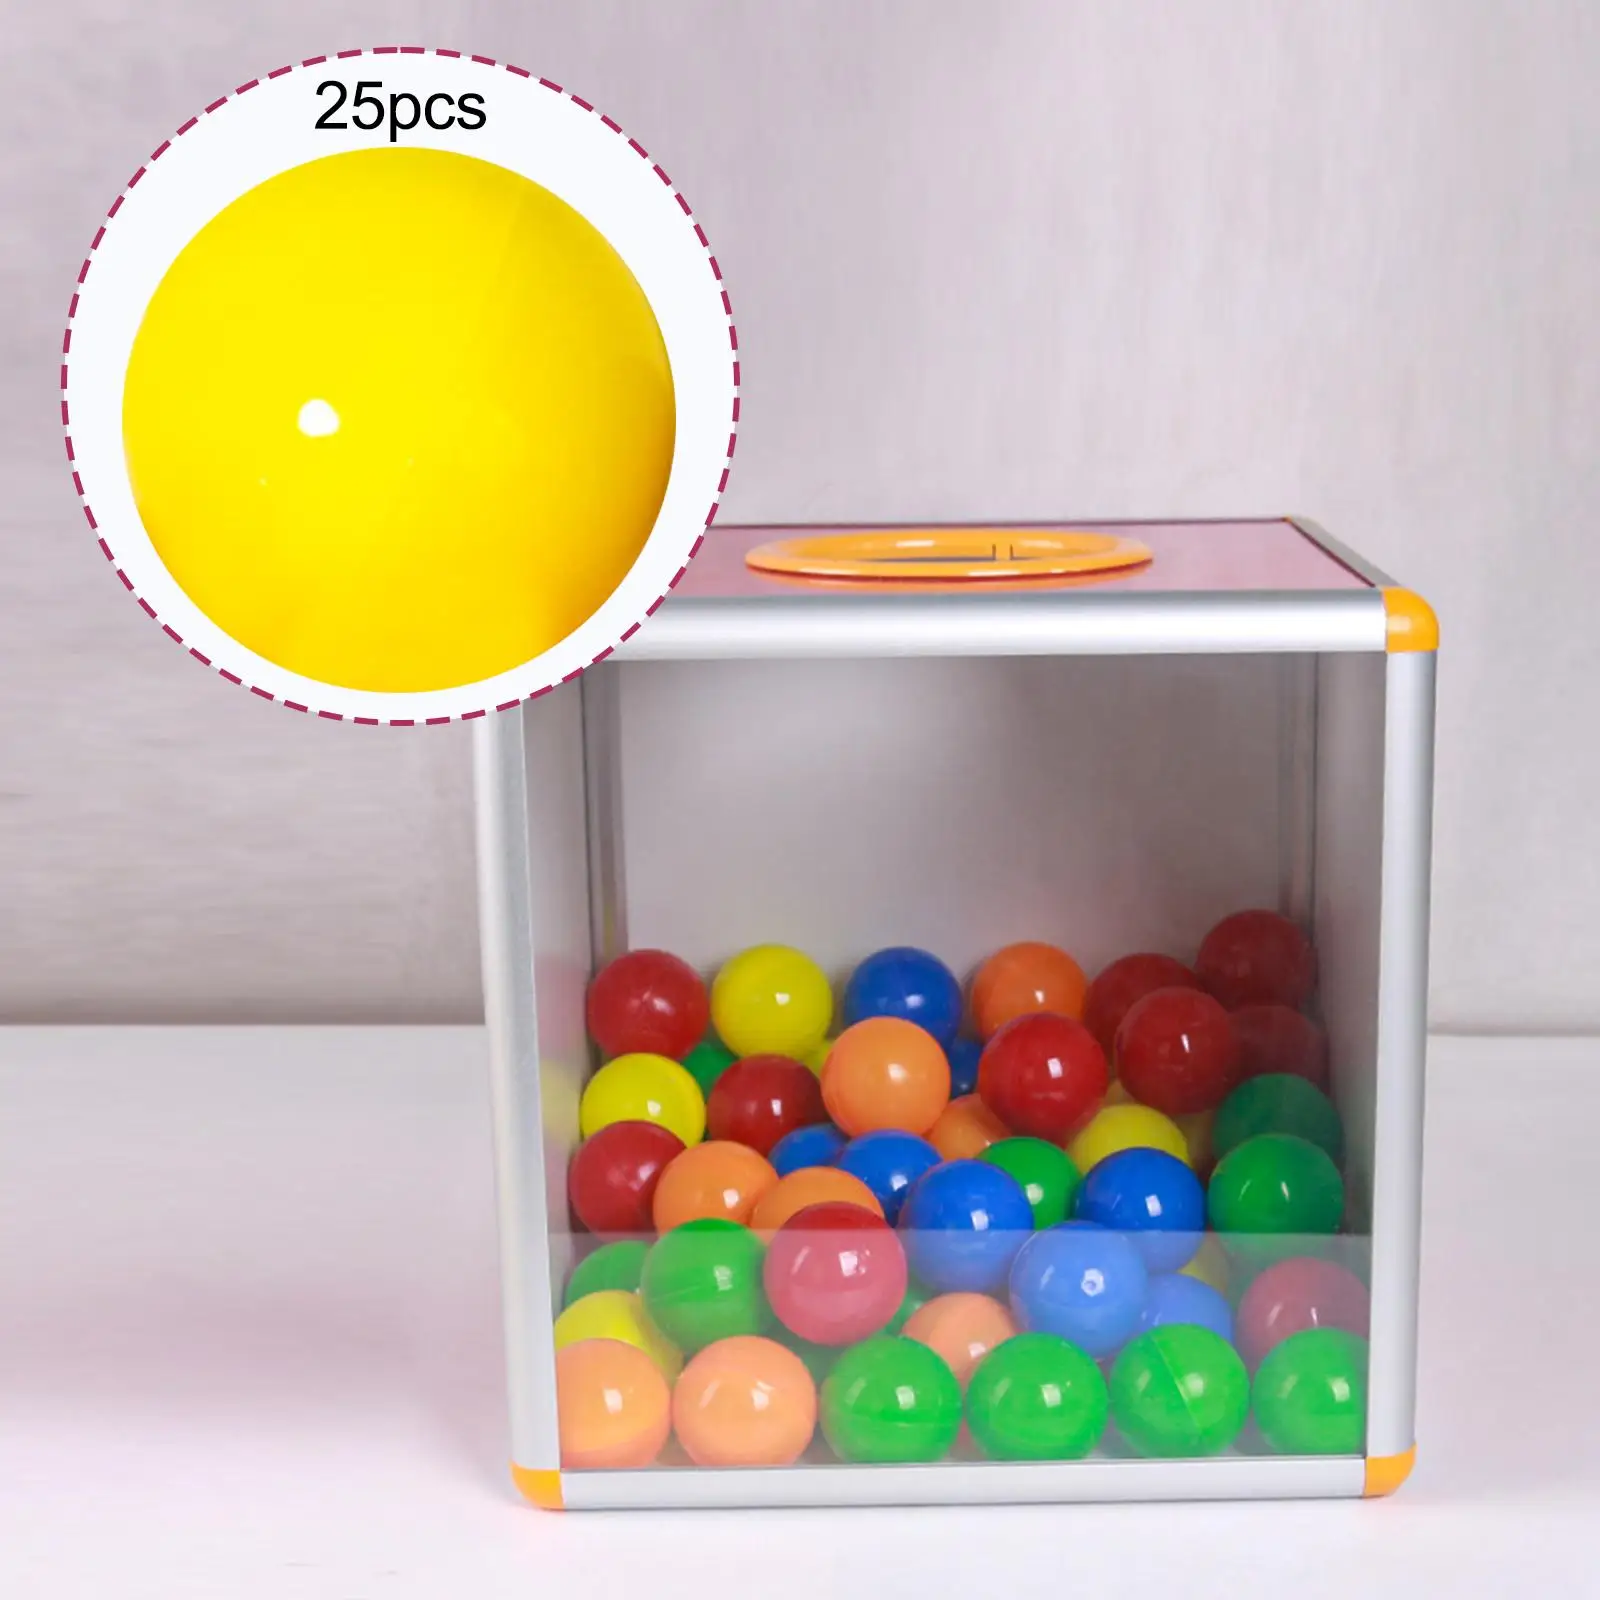 25 Pieces Bingo Ball Durable Equipment Universal Replacement Parts Tally Ball Raffle Balls for Parties Office Nights Family Home